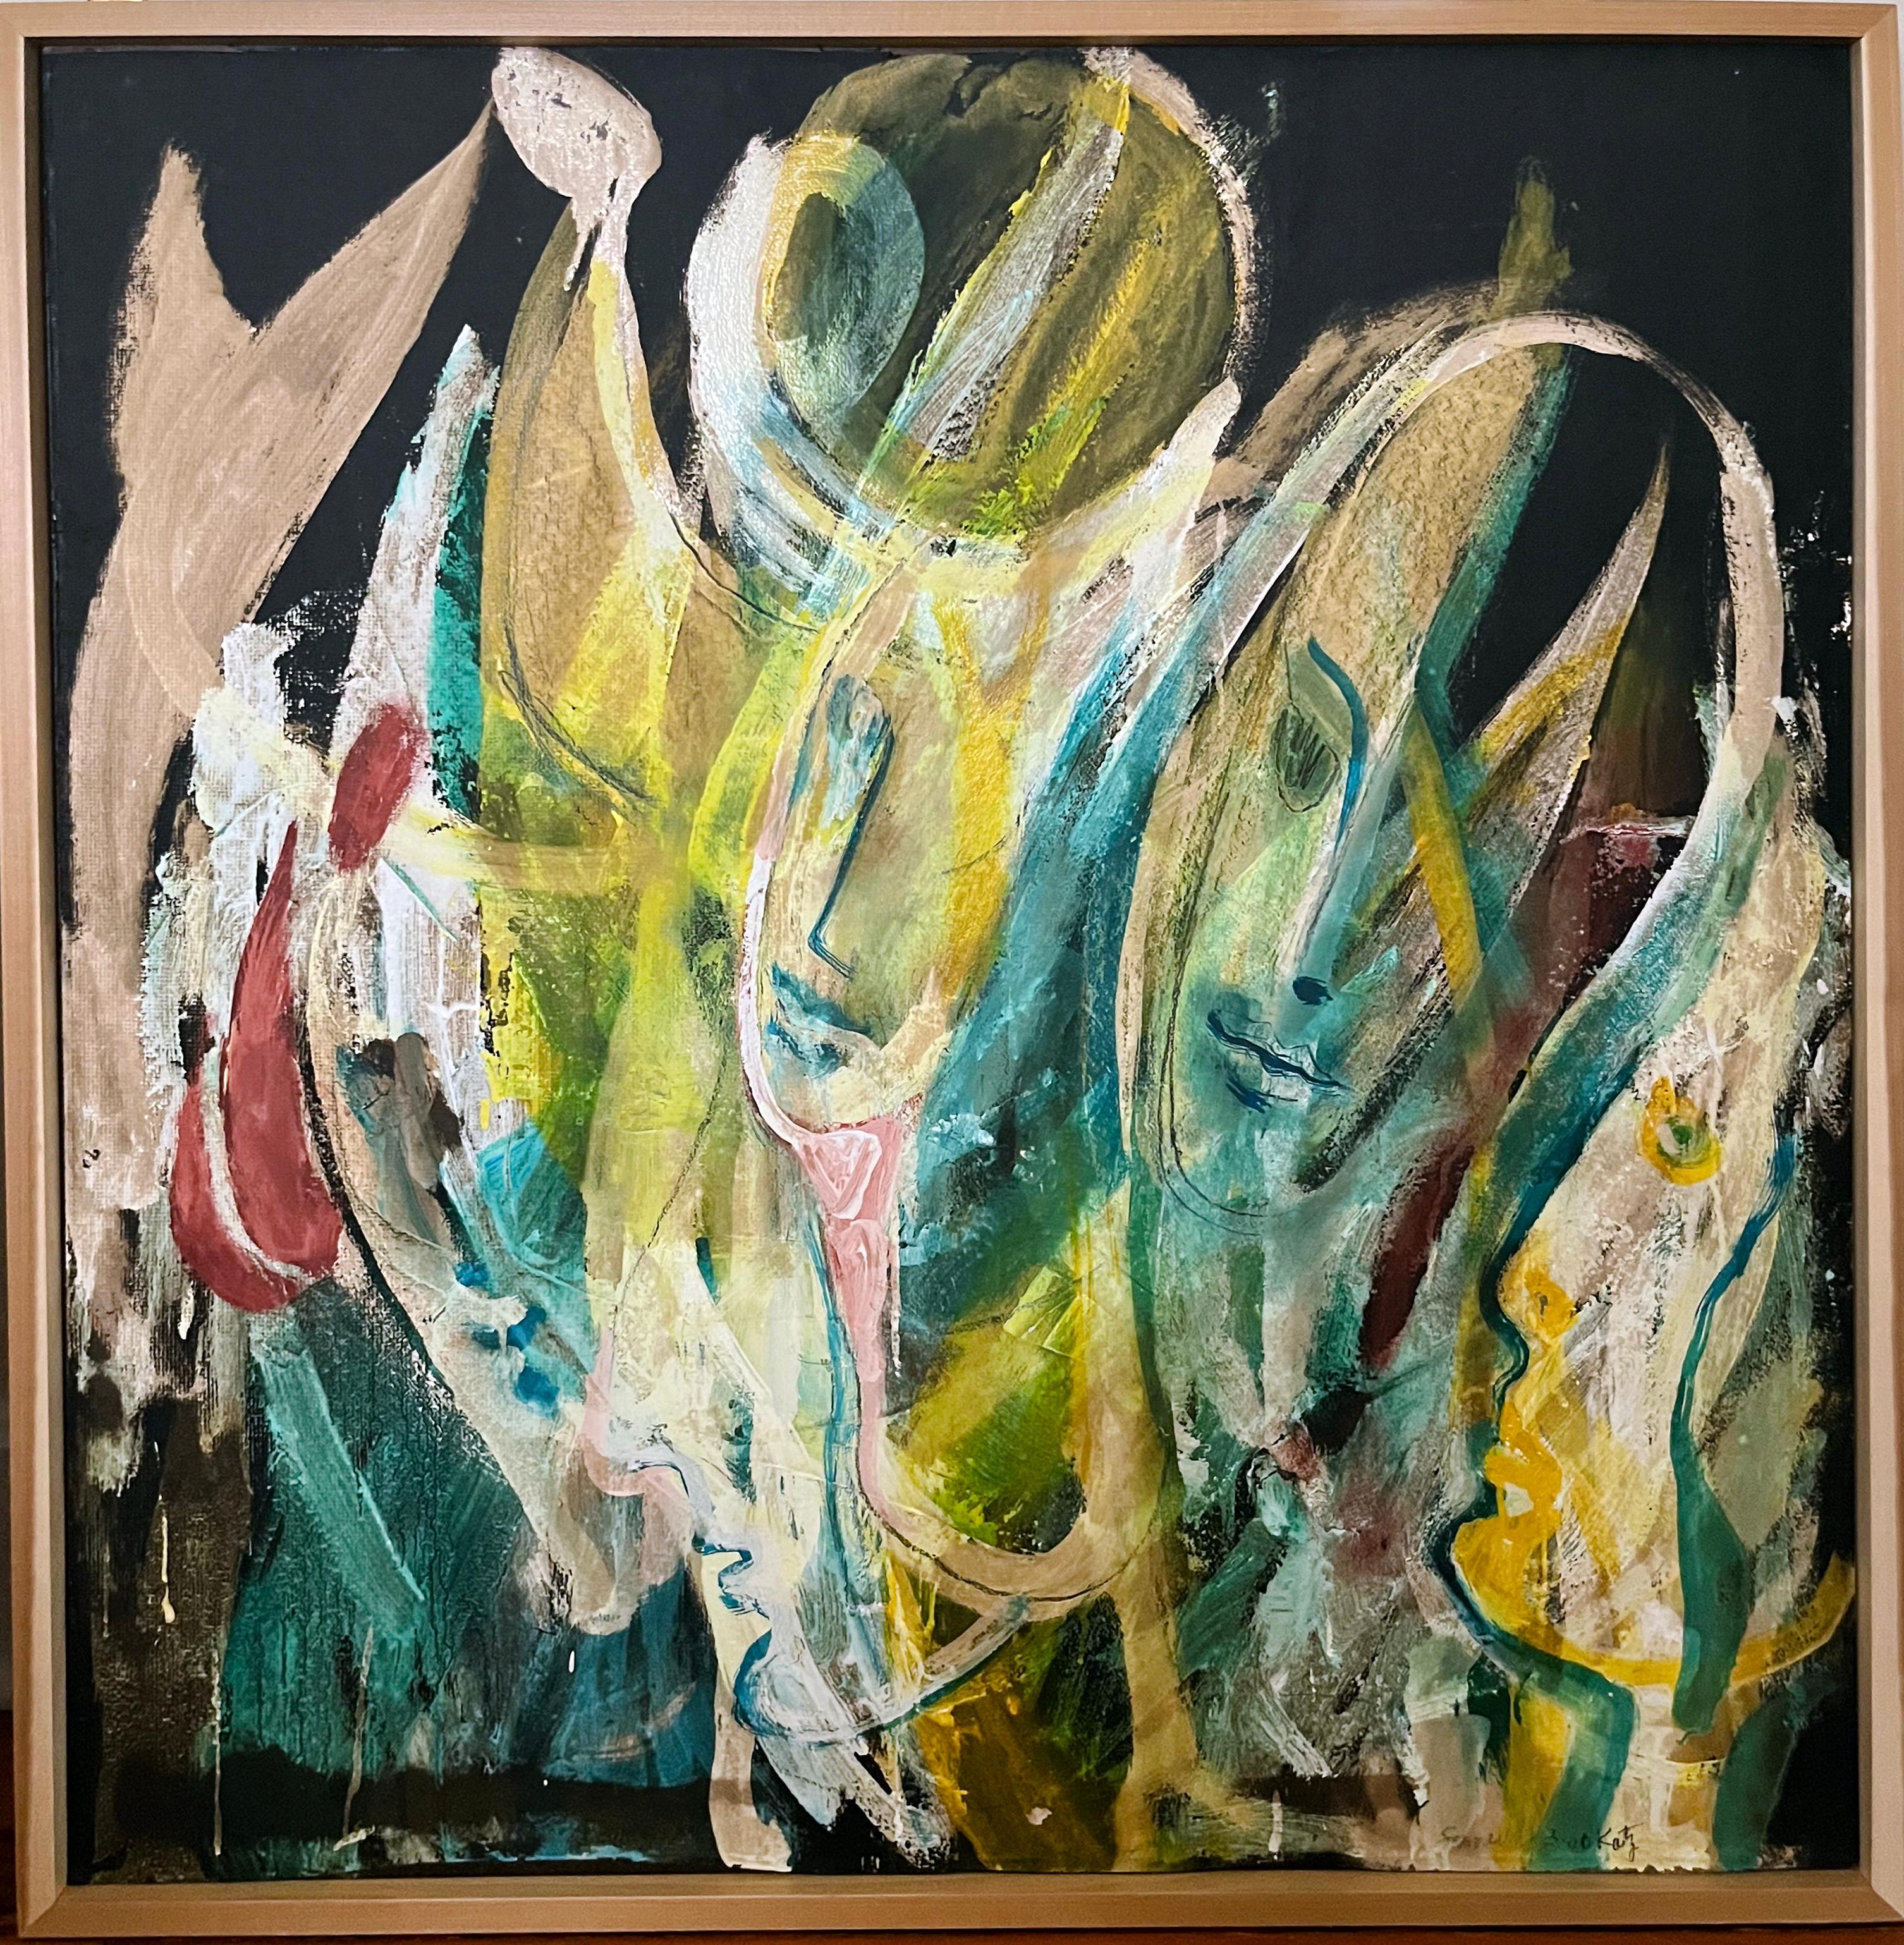 ABSTRACT WOMEN - Painting by Samuel Bookatz